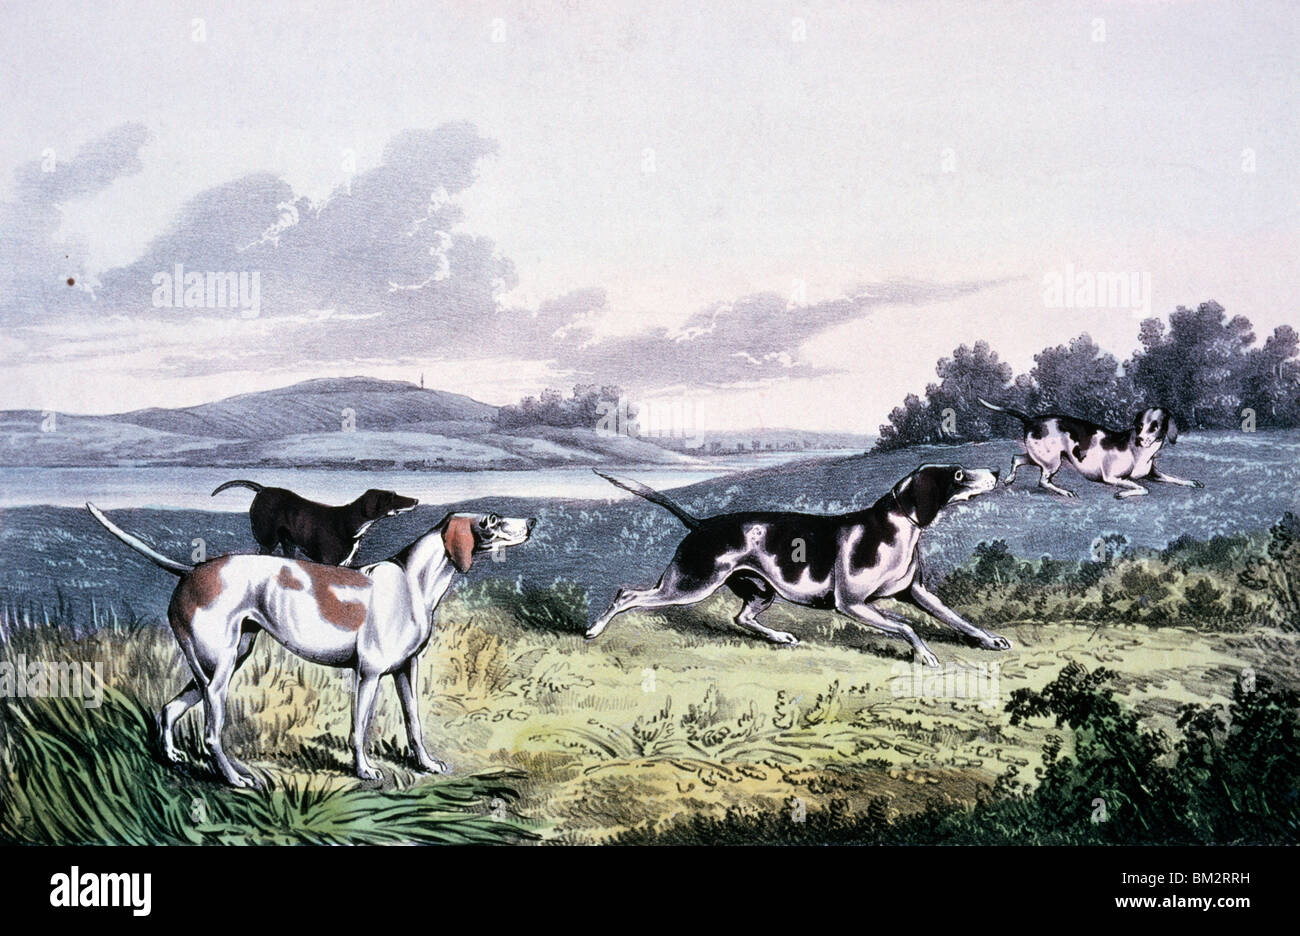 Zeiger, Currier und Ives, Farbe Lithographie, (1857-1907), Washington, D.C., Library of Congress Stockfoto